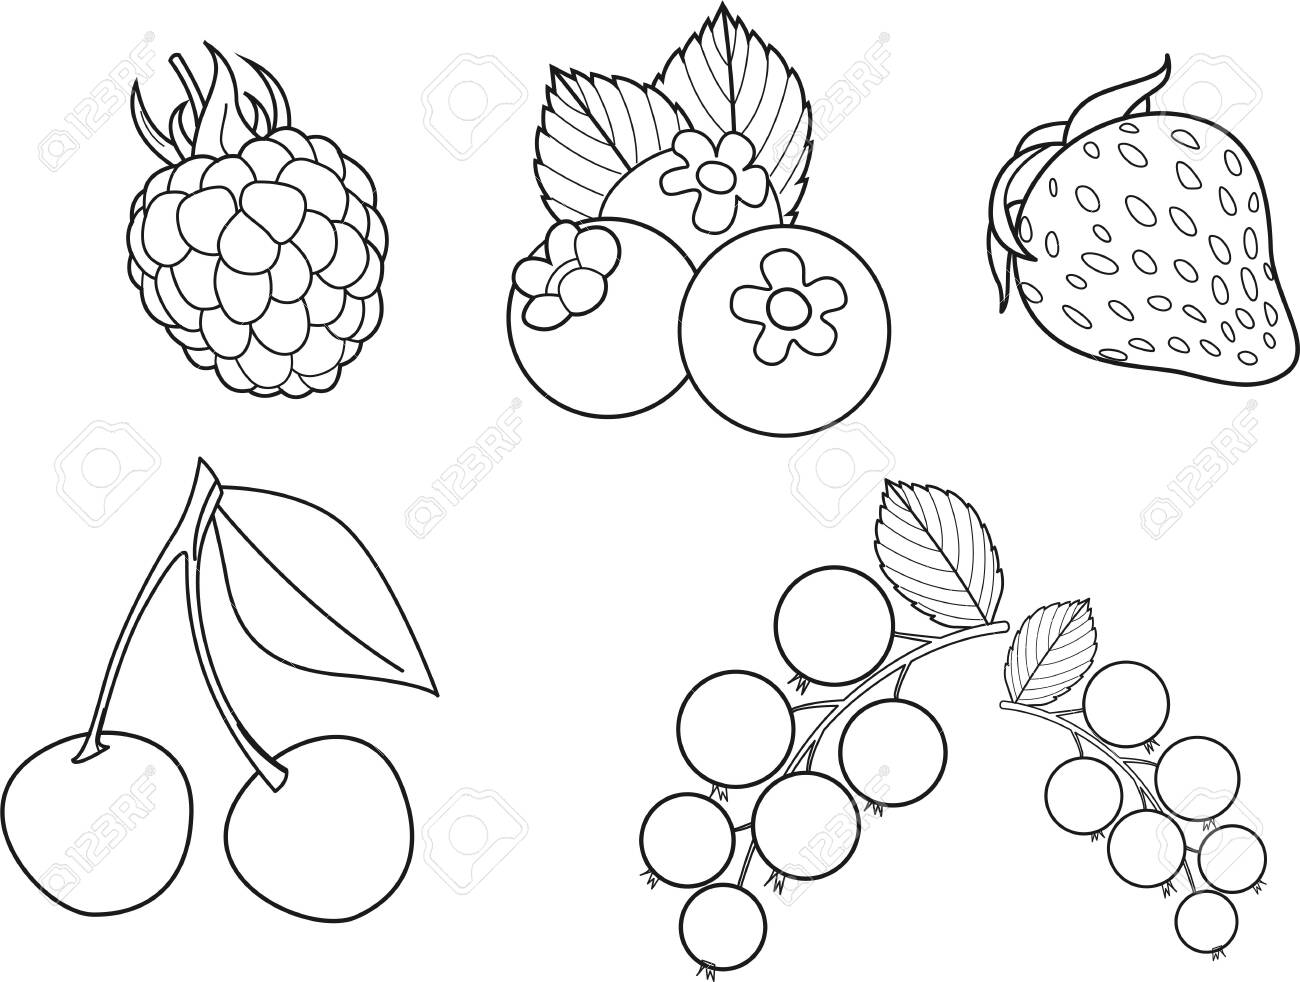 Coloring page set of vector berries including vector raspberry blueberry fresh strawberry juicy cherry gooseberry coloring book black and white royalty free svg cliparts vectors and stock illustration image